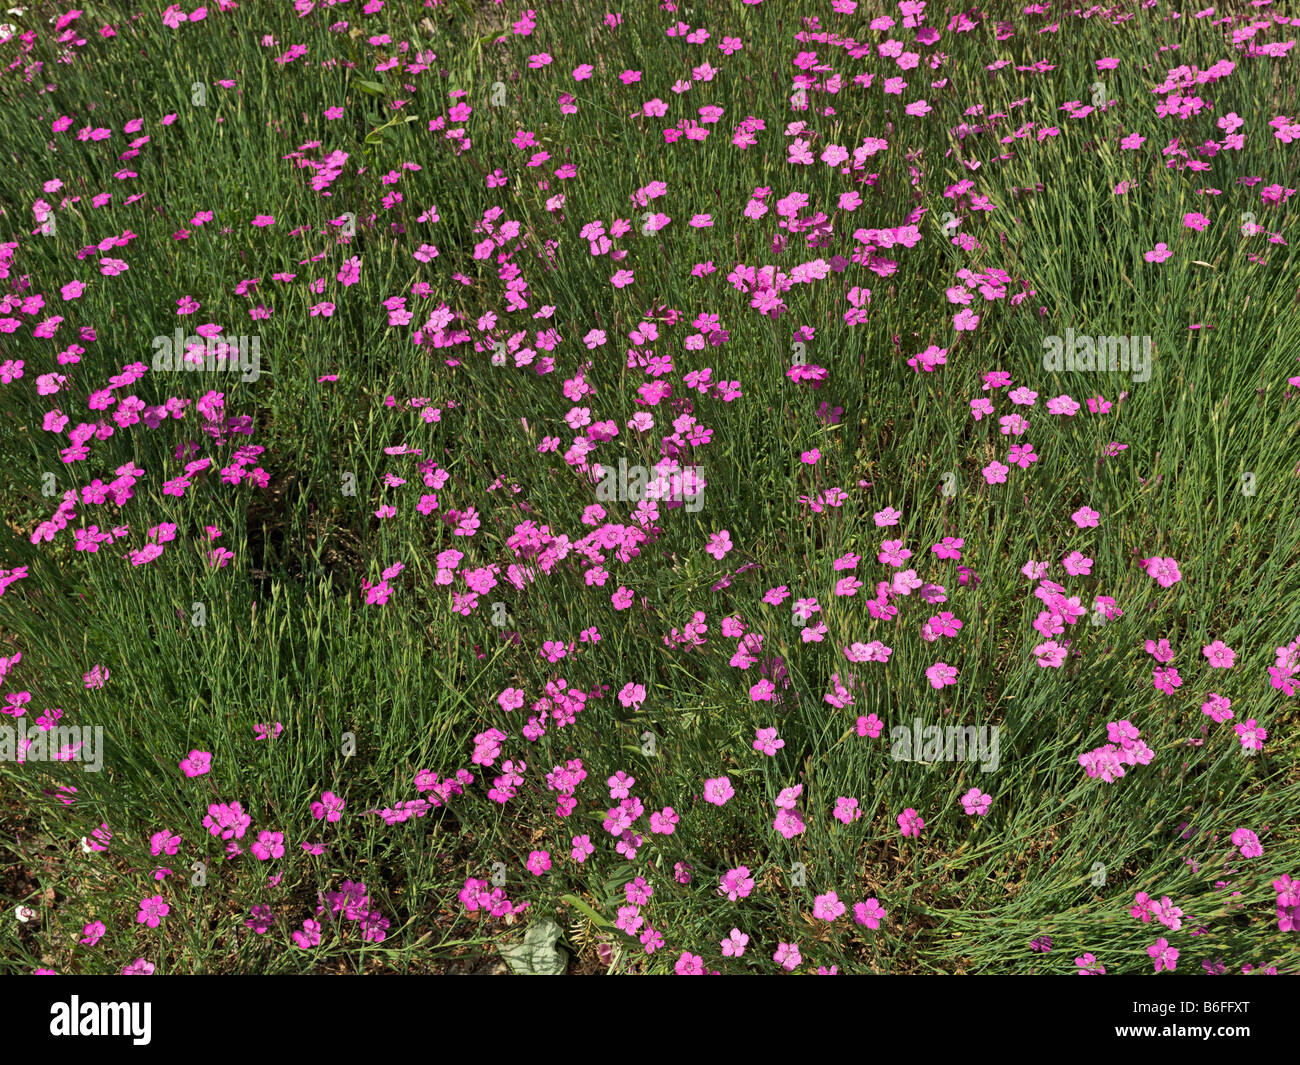 Field of Maiden Pink (Dianthus deltoides) in bloom Stock Photo